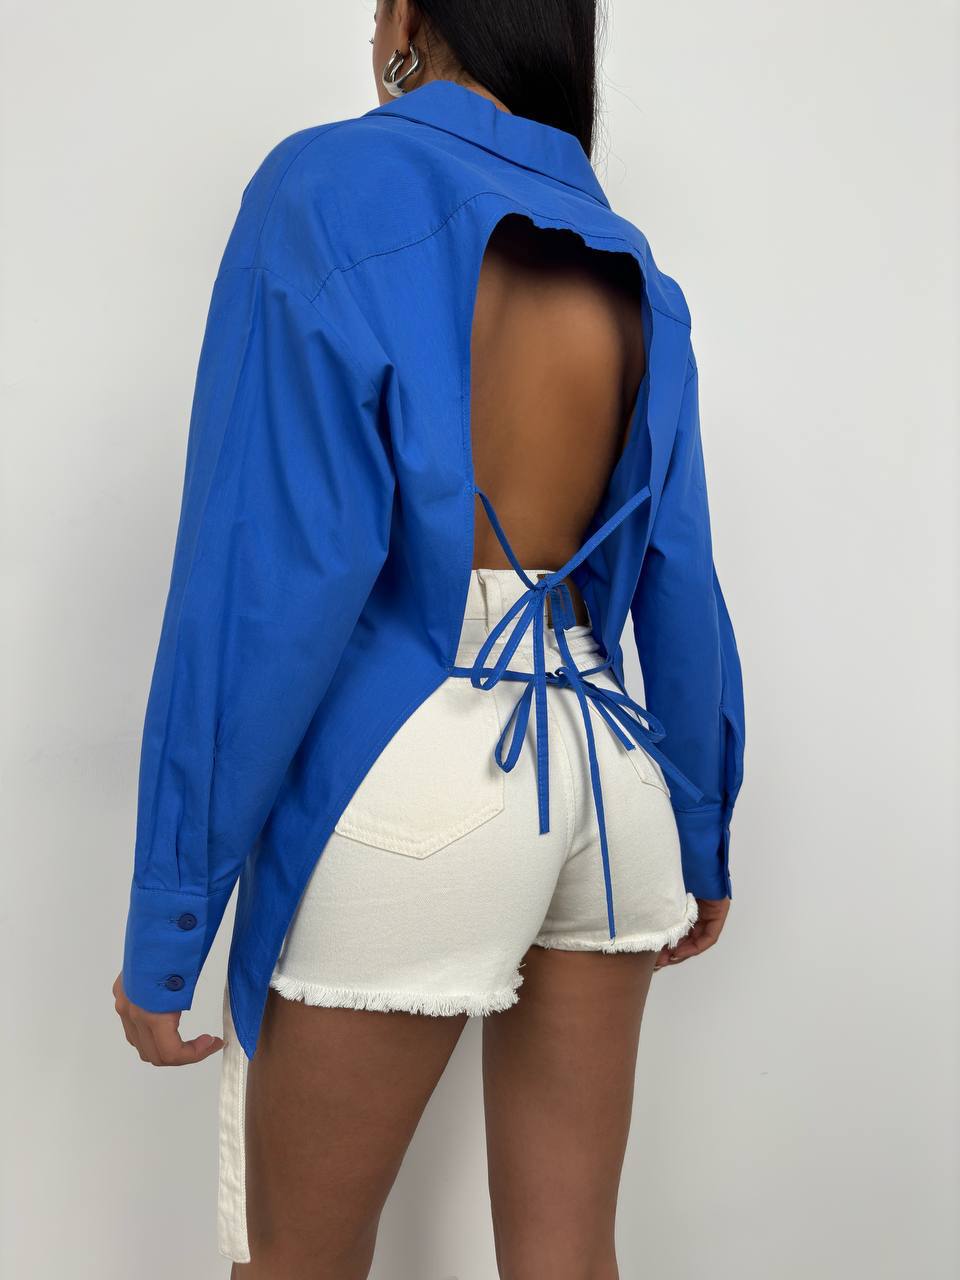 Backless Long Sleeveless Lace-up Shirt in Saxe Blue - Noxlook